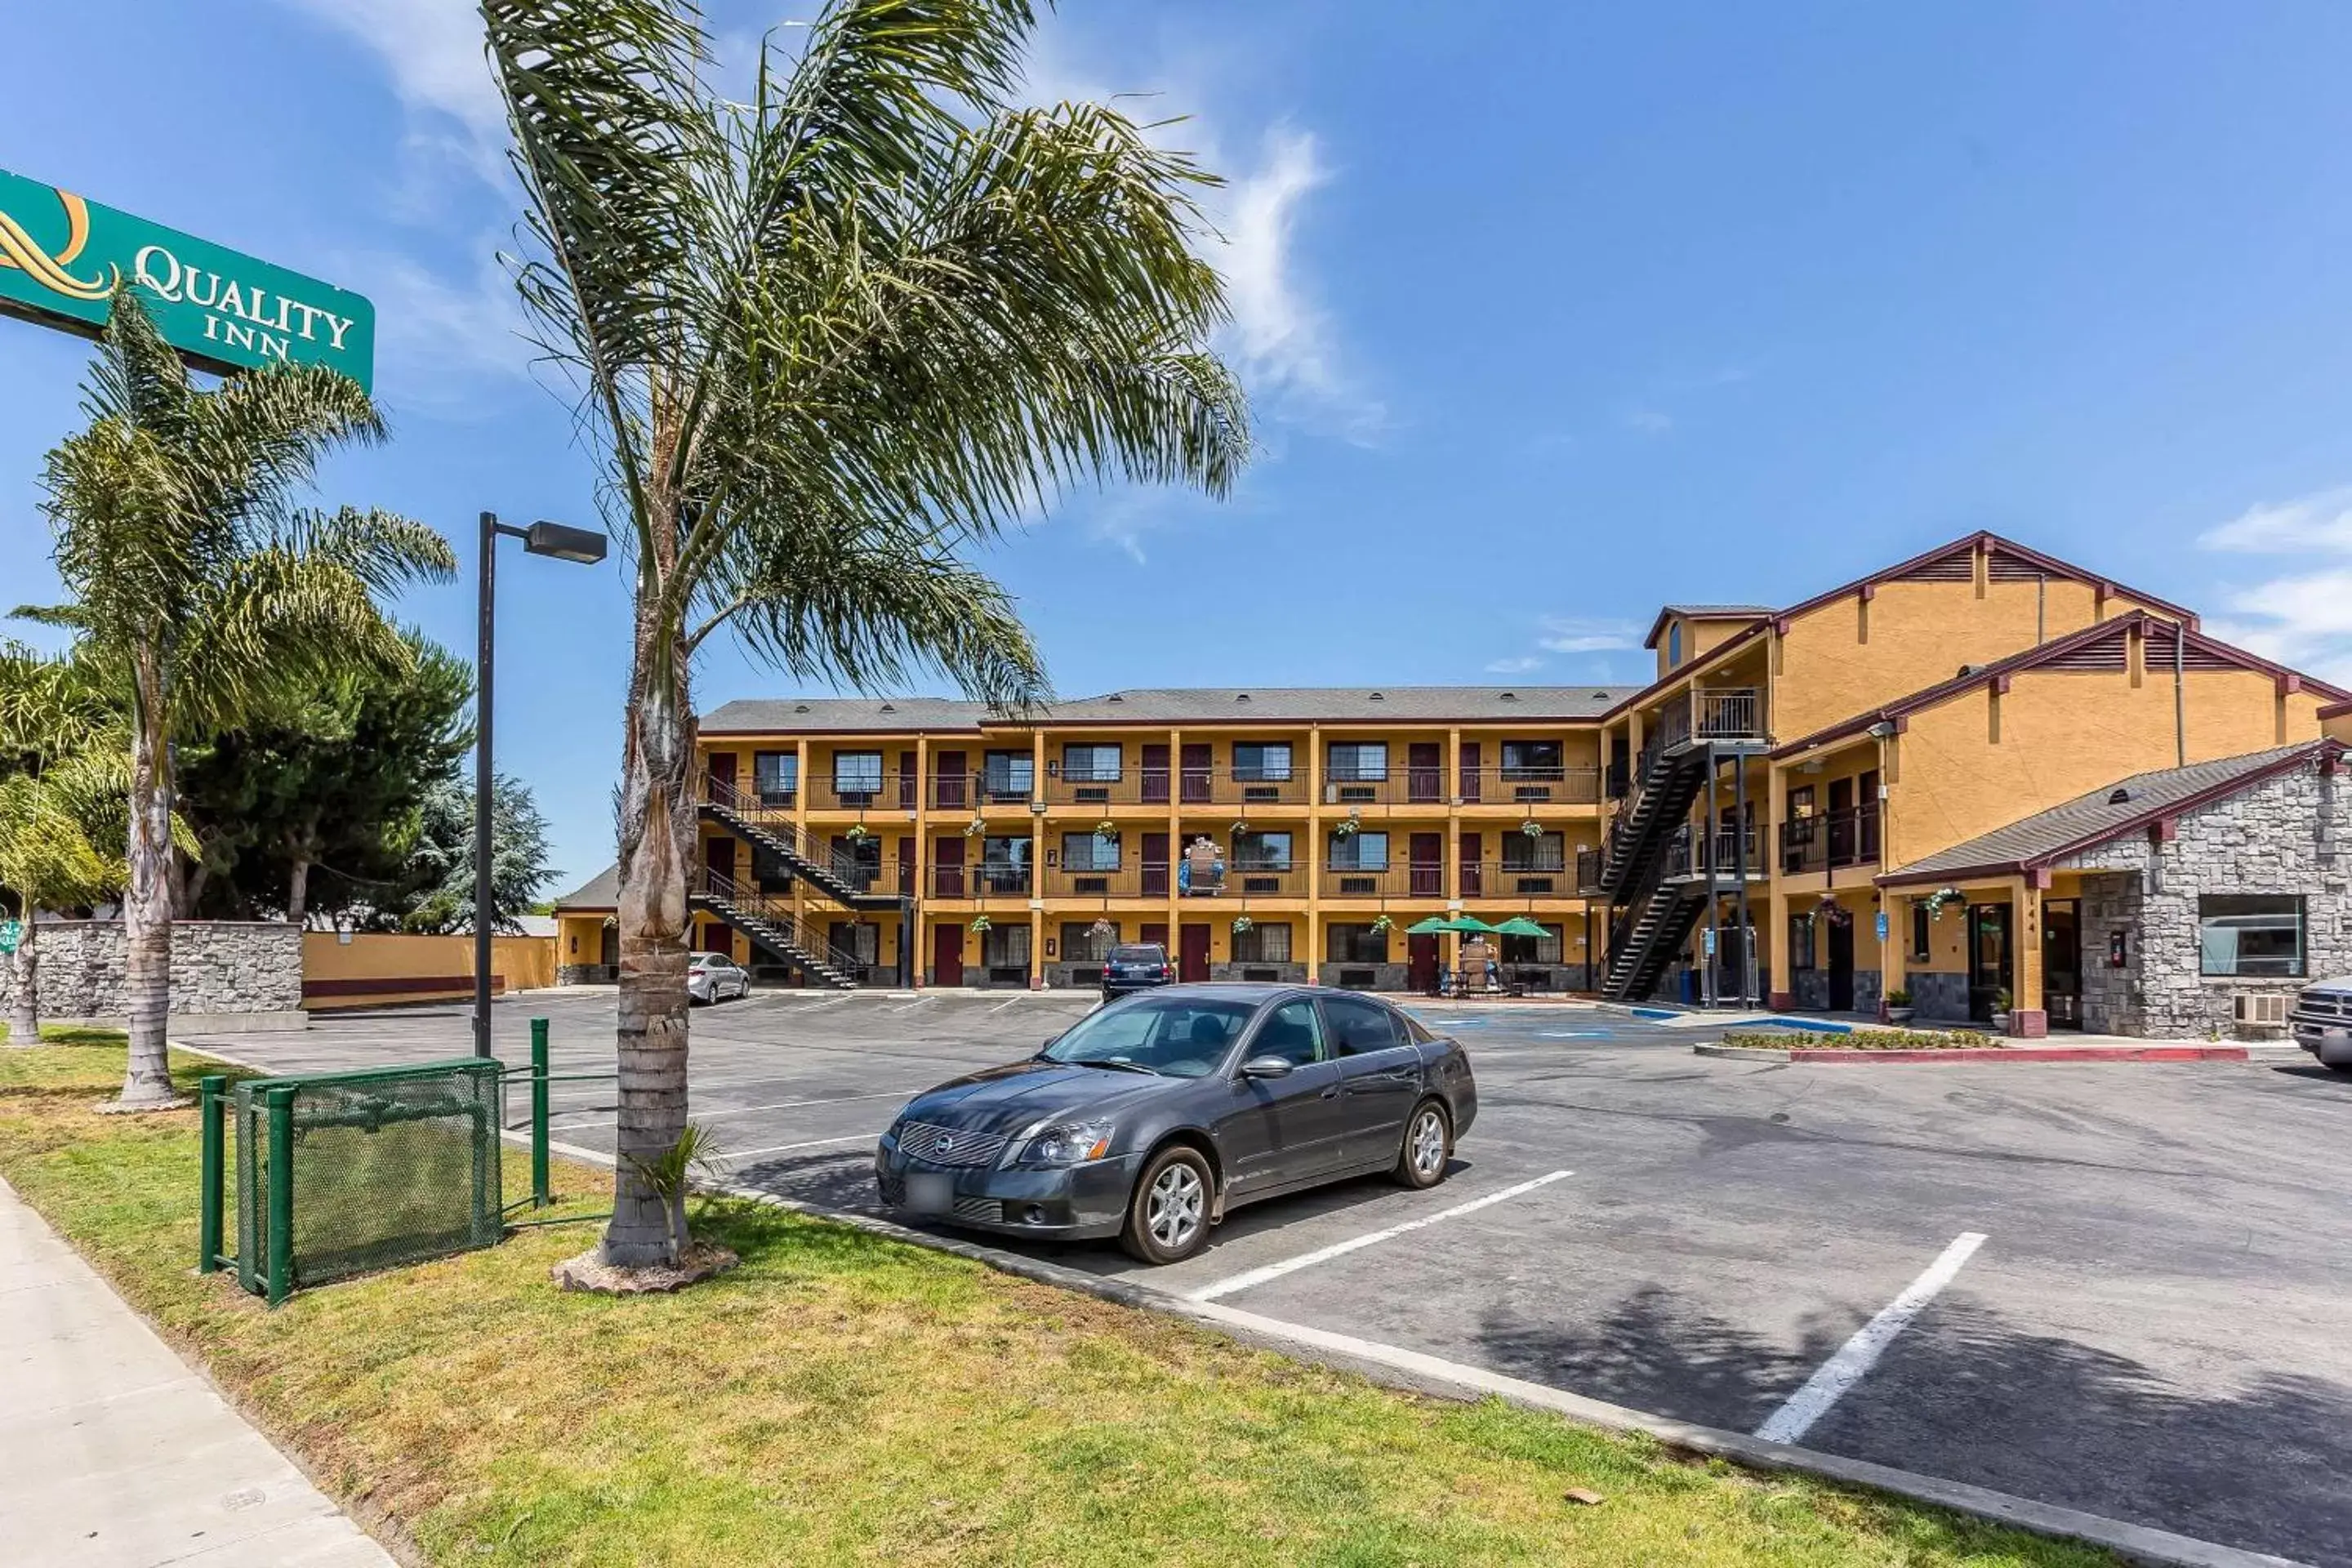 Property Building in Quality Inn Salinas